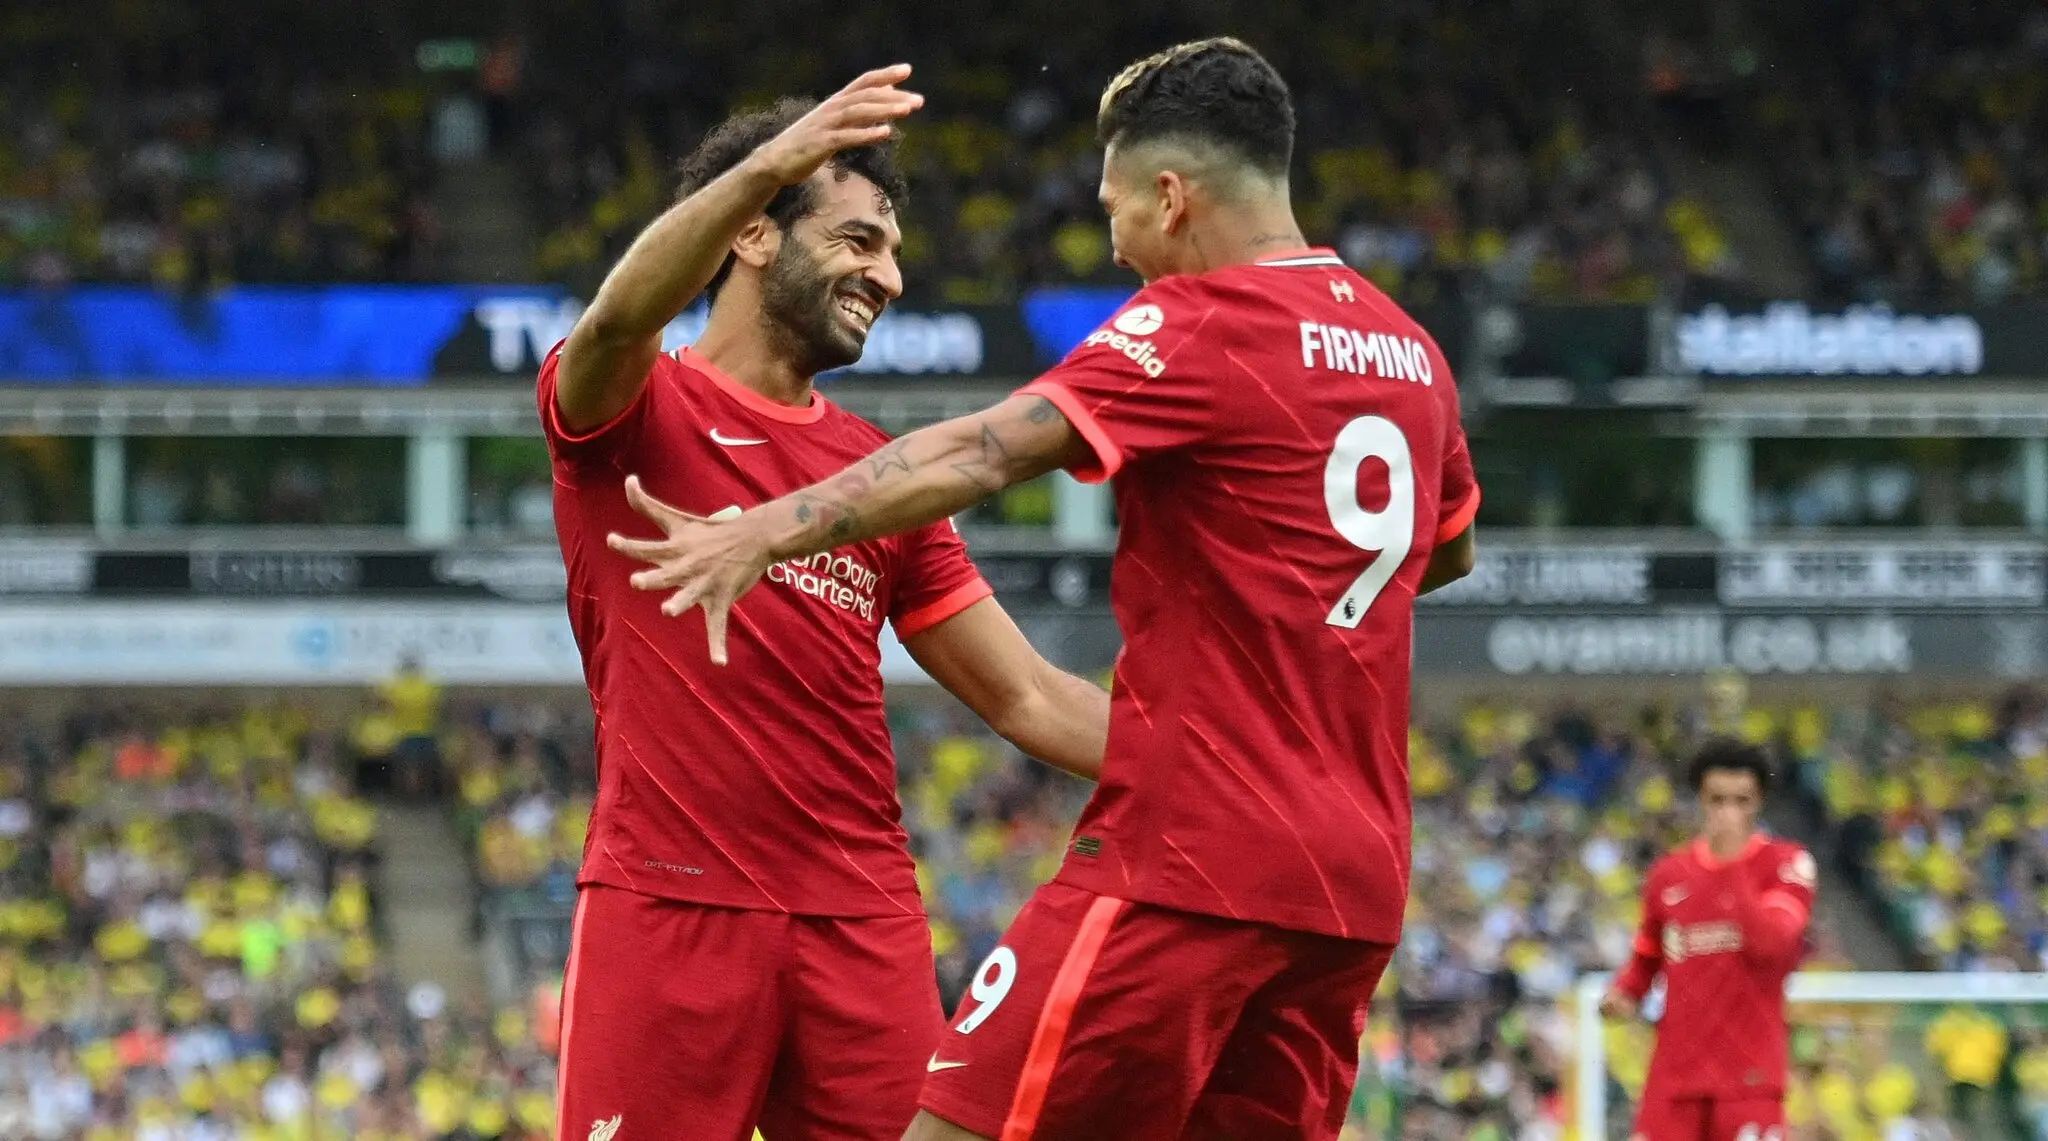 Liverpool’s Mohamed Salah and Roberto Firmino celebrate a goal